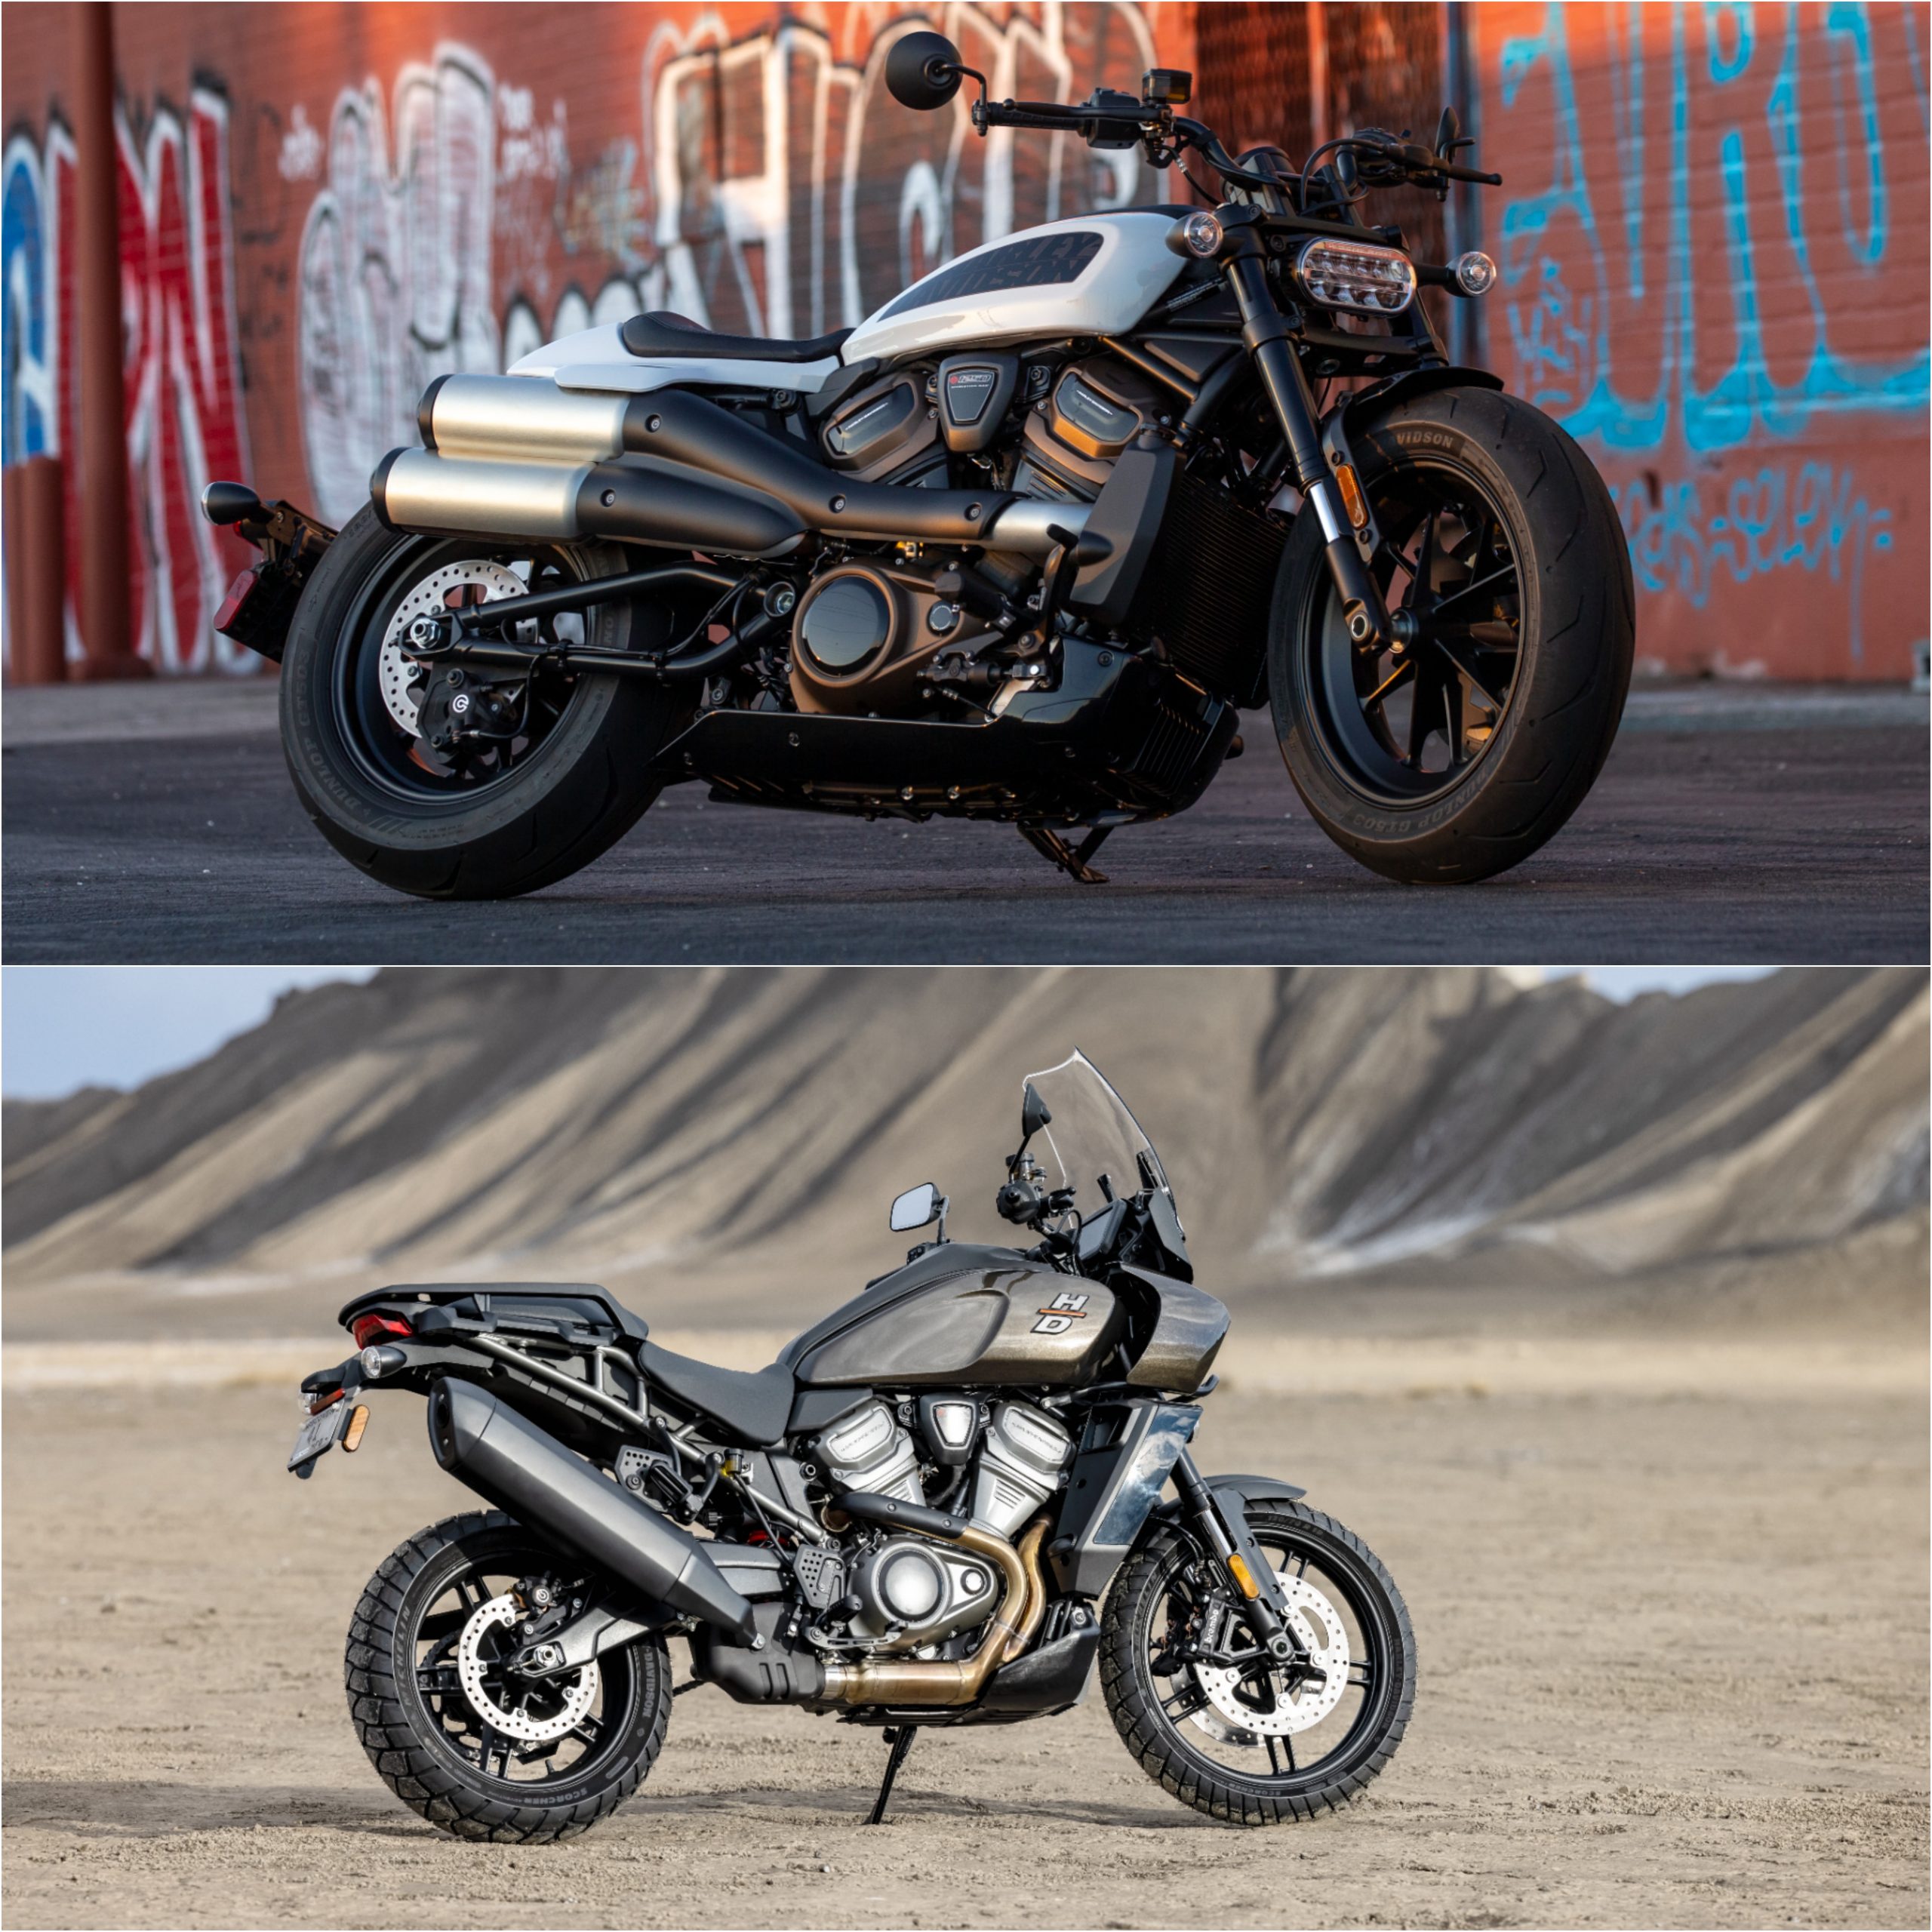 Is The 2021 Harley Davidson Pan America 1250 A Better Street Bike Than The Sportster S